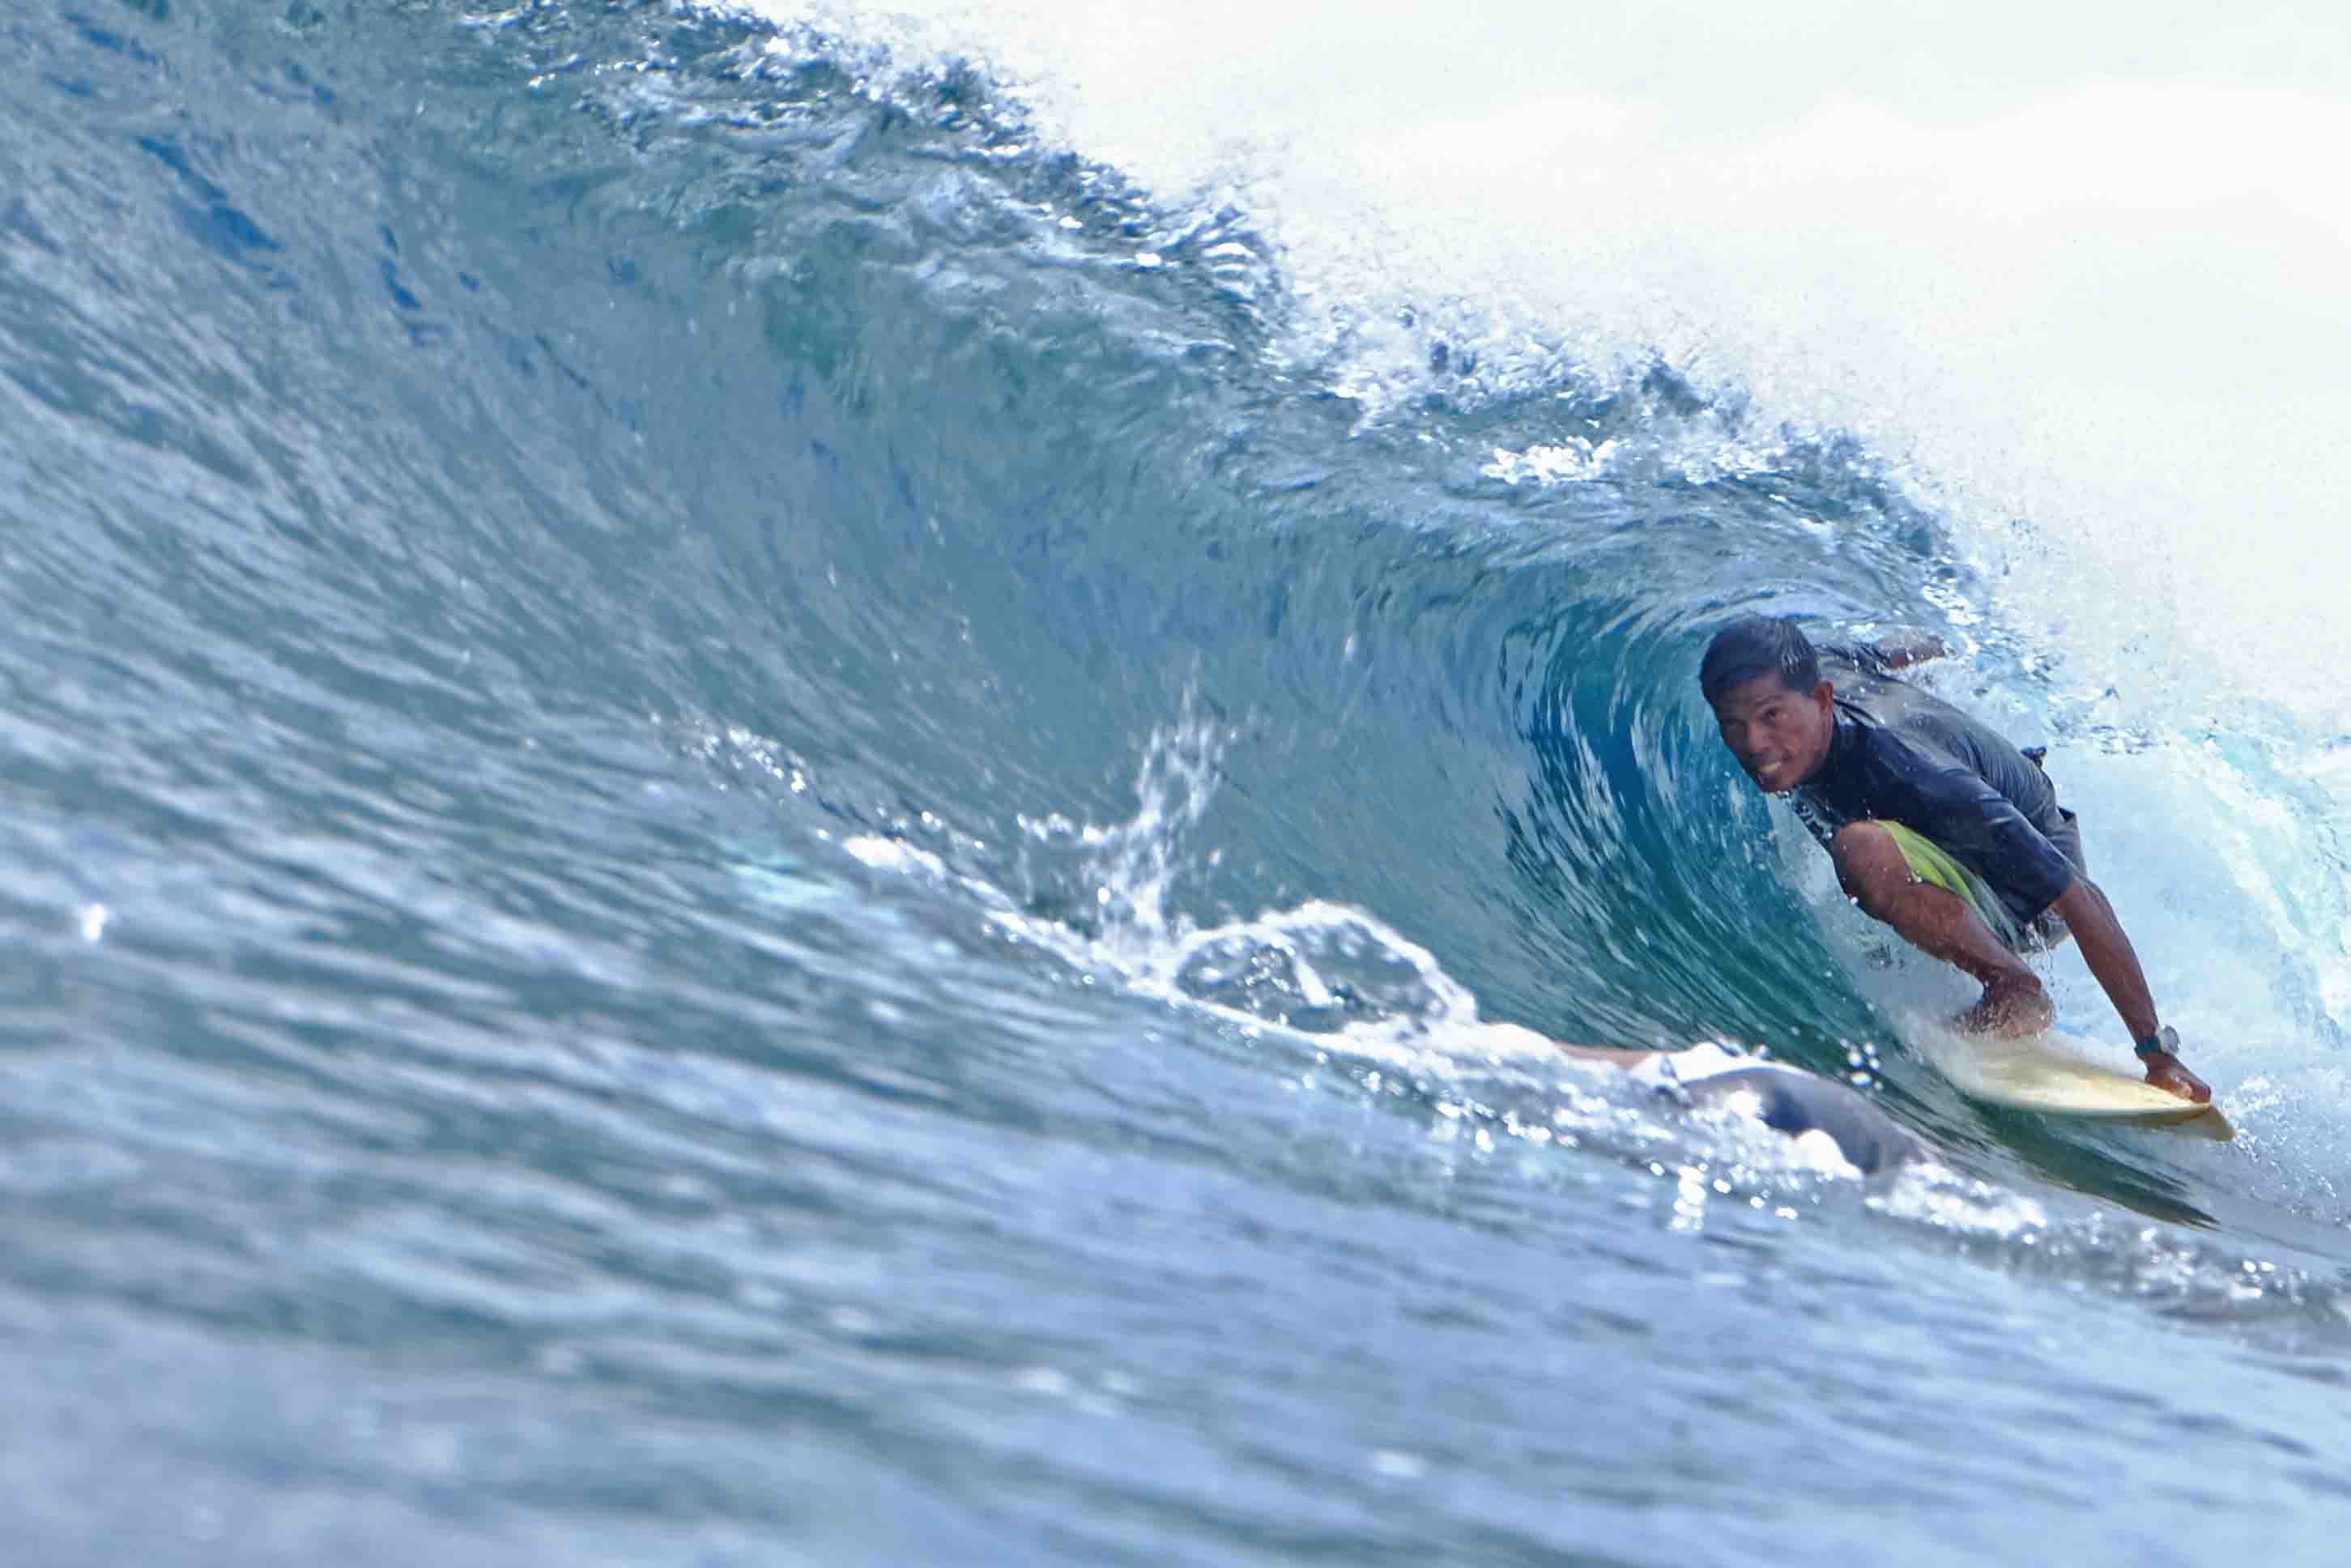 Philippines' maiden surfing tourney slated September